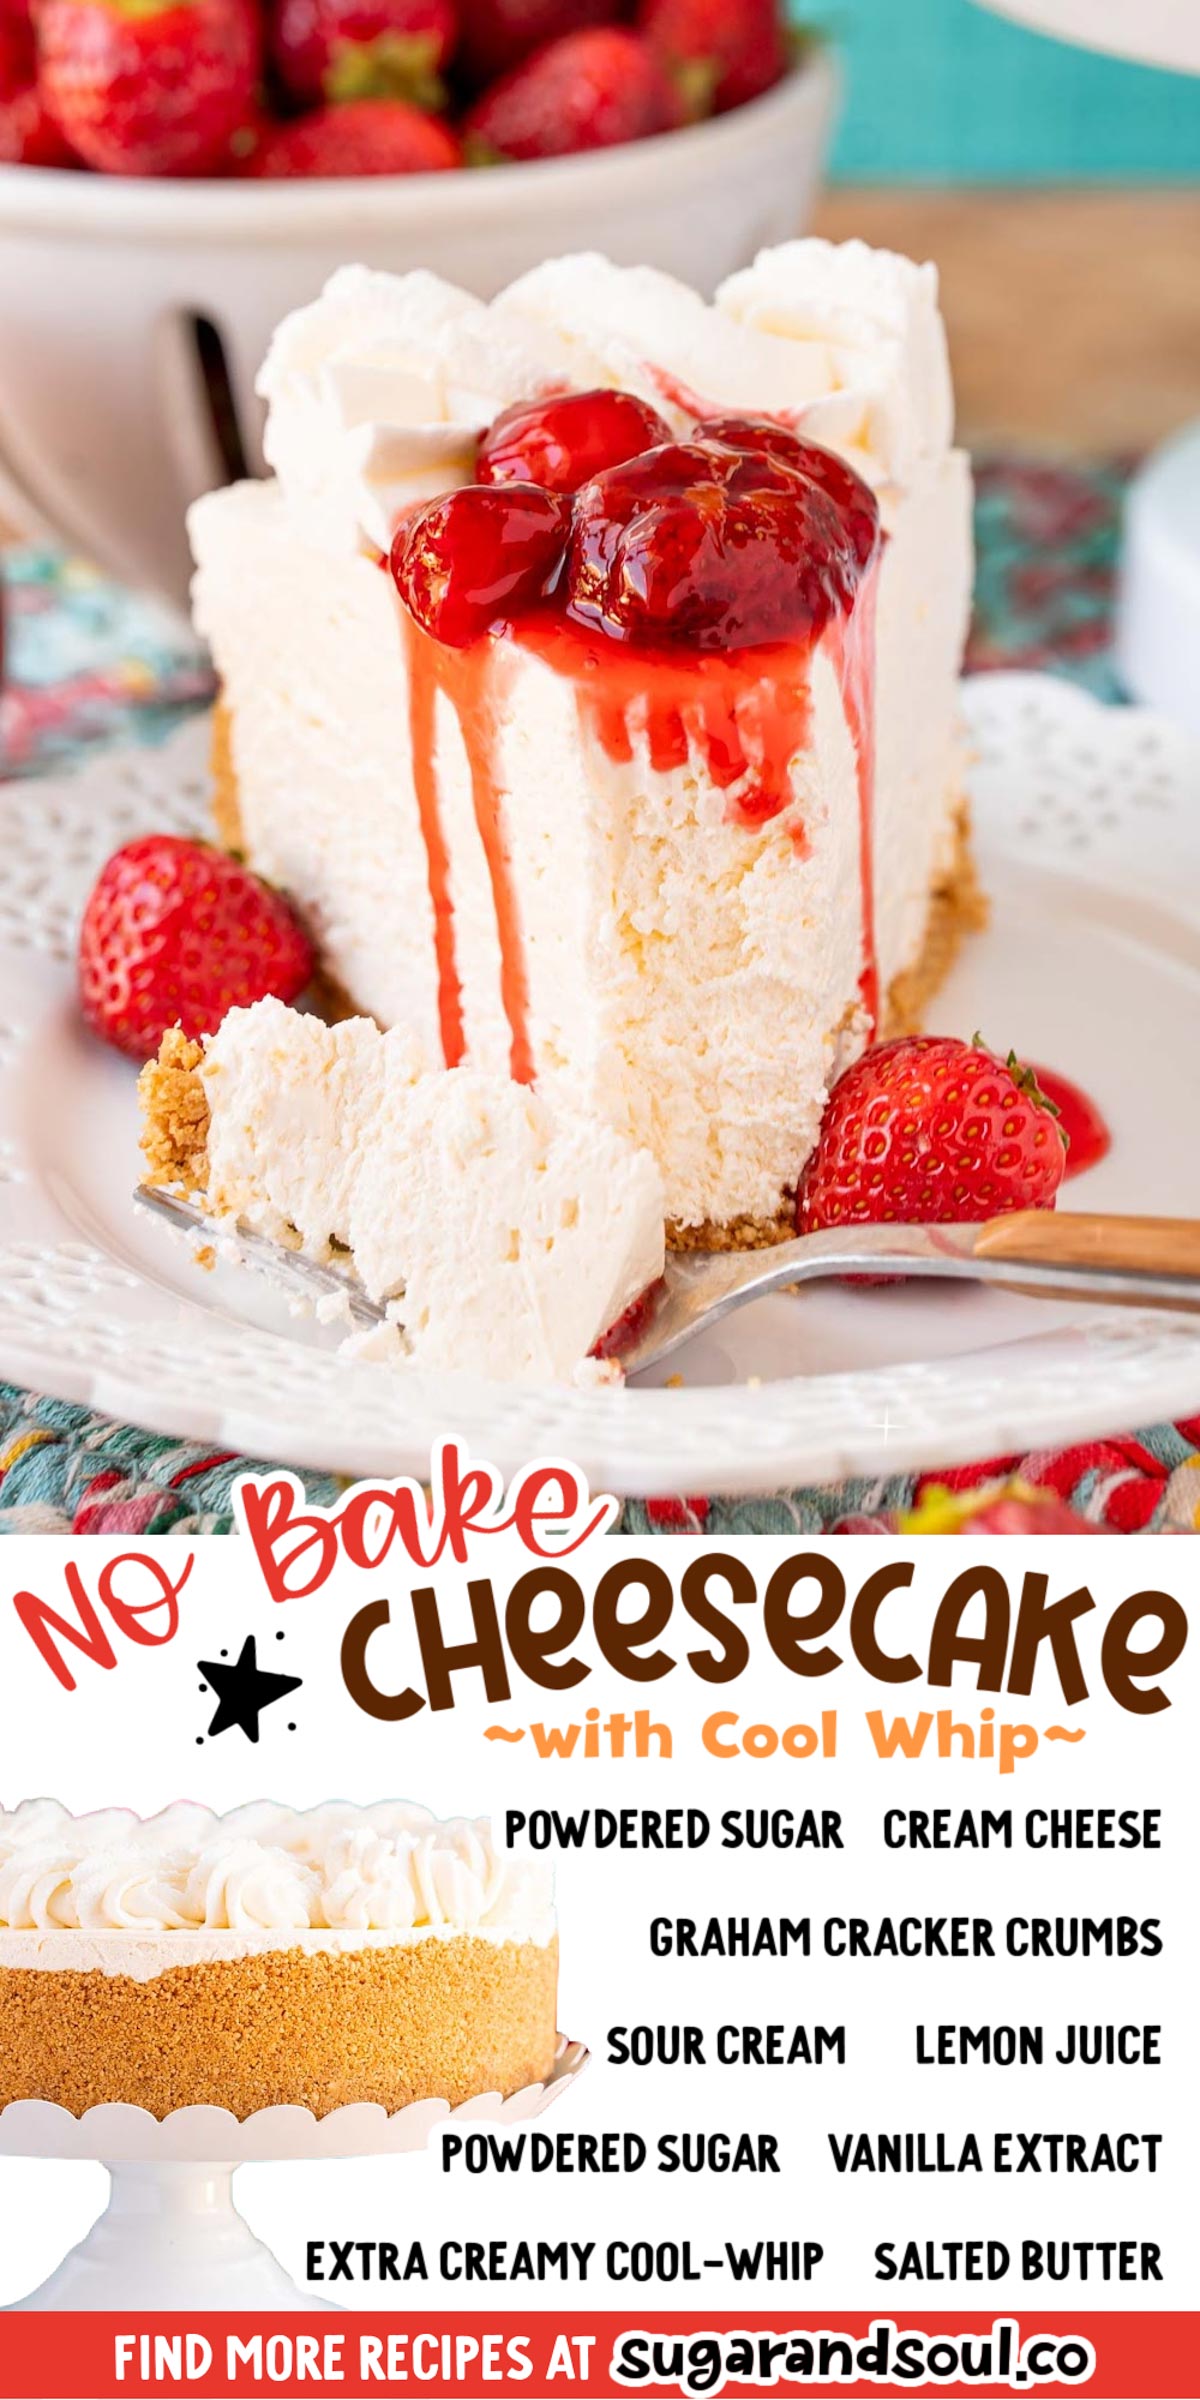 No Bake Cheesecake is prepped in just 20 minutes using ingredients like extra creamy cool whip, powdered sugar, and cream cheese! Provides a dozen thick, fluffy, and creamy slices! via @sugarandsoulco